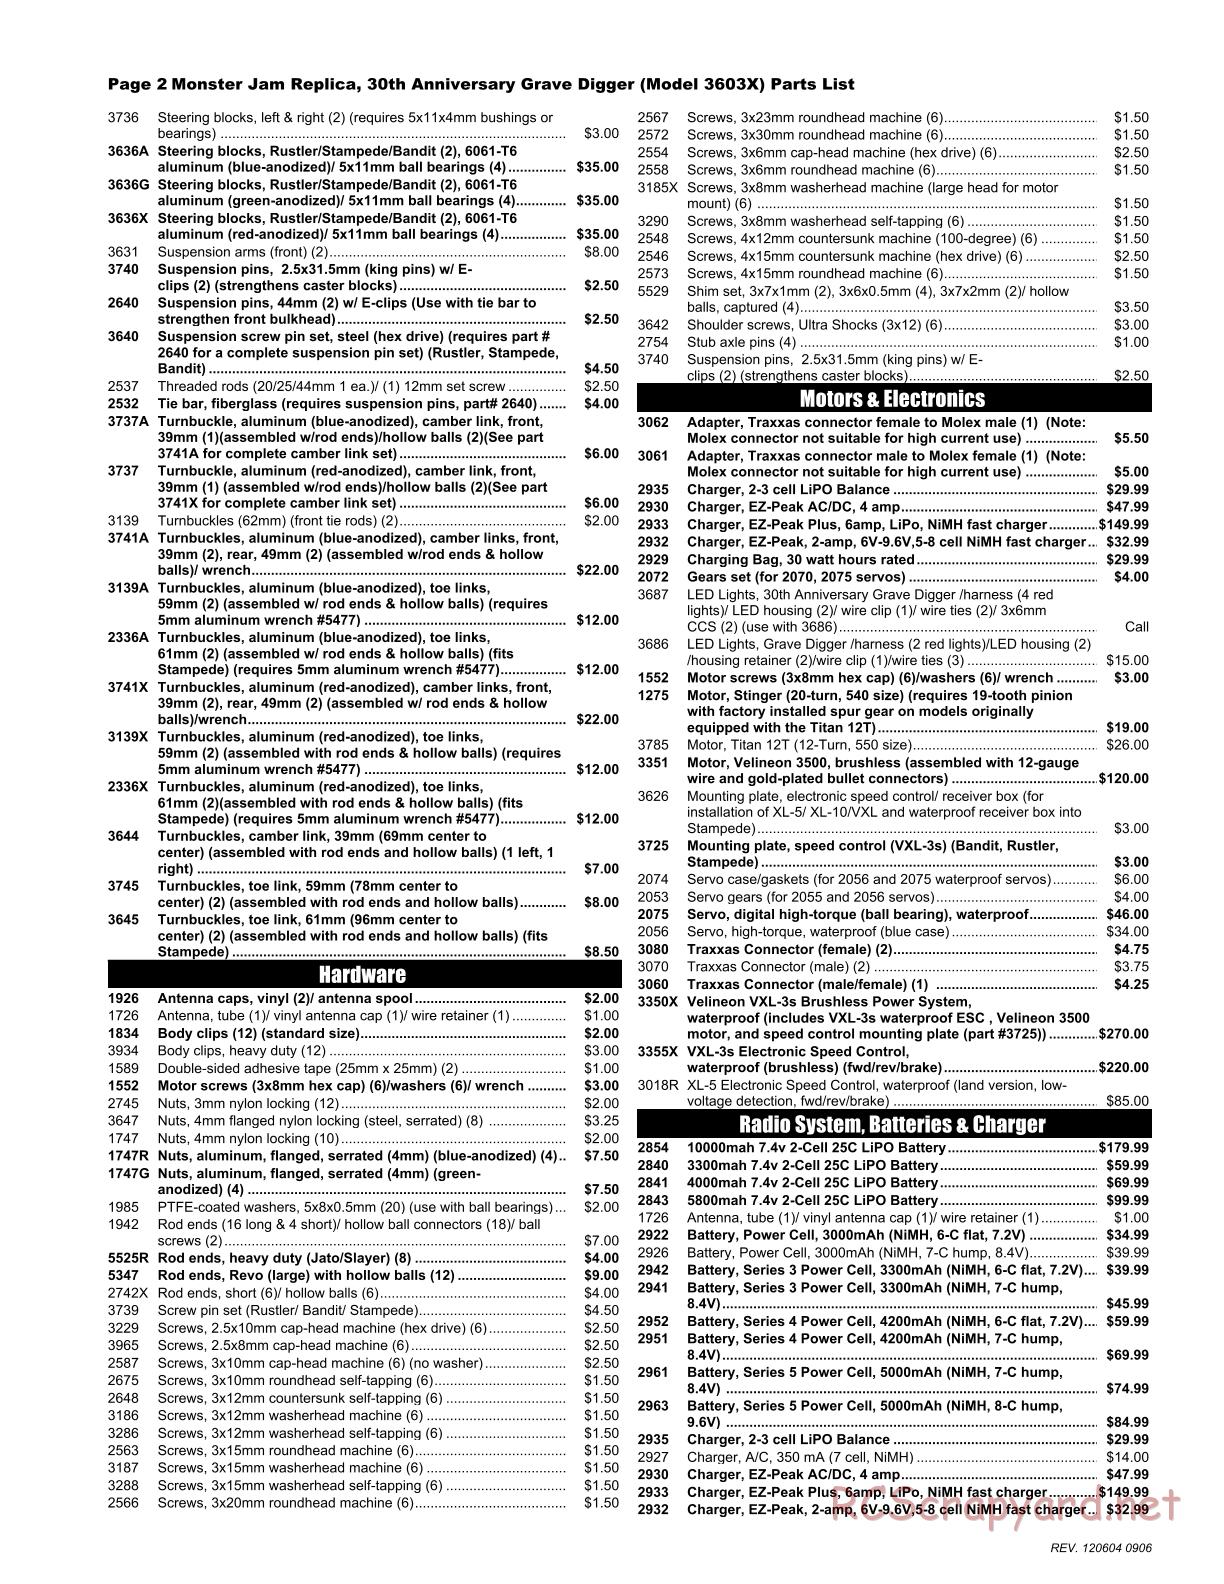 Traxxas - Monster Jam - Grave Digger 30th Anniversary Special - Parts List - Page 2